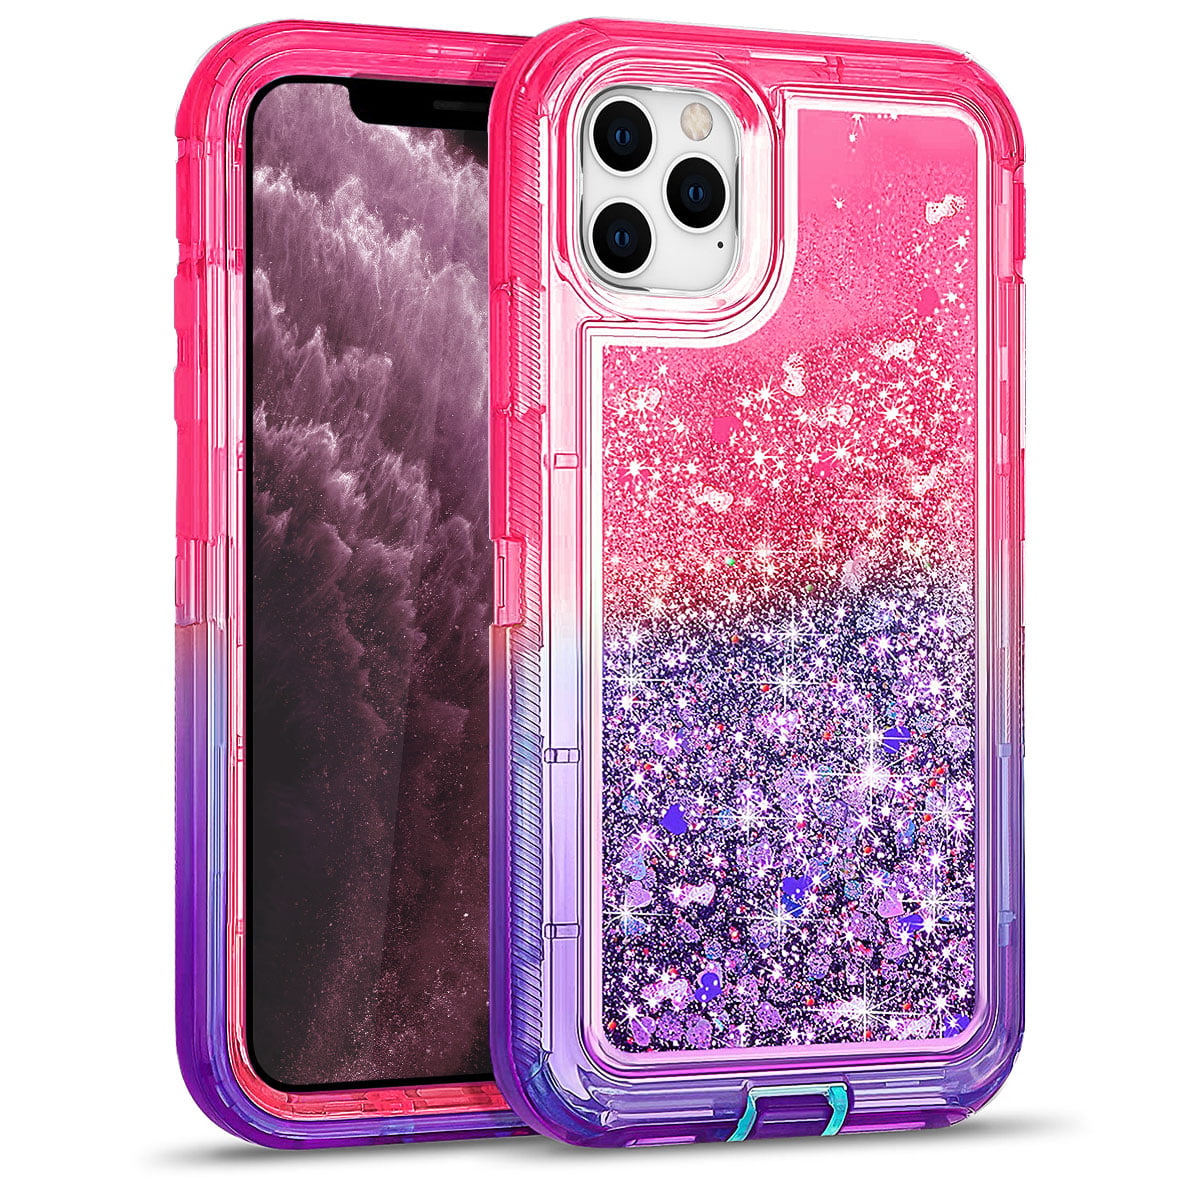 iPhone 11Pro Max Case, Cellularvilla Glitter Heavy Duty Girly Liquid Bling  Quicksand 3 in 1 Hybrid Shockproof Hard Bumper Soft Clear Rubber Protective  